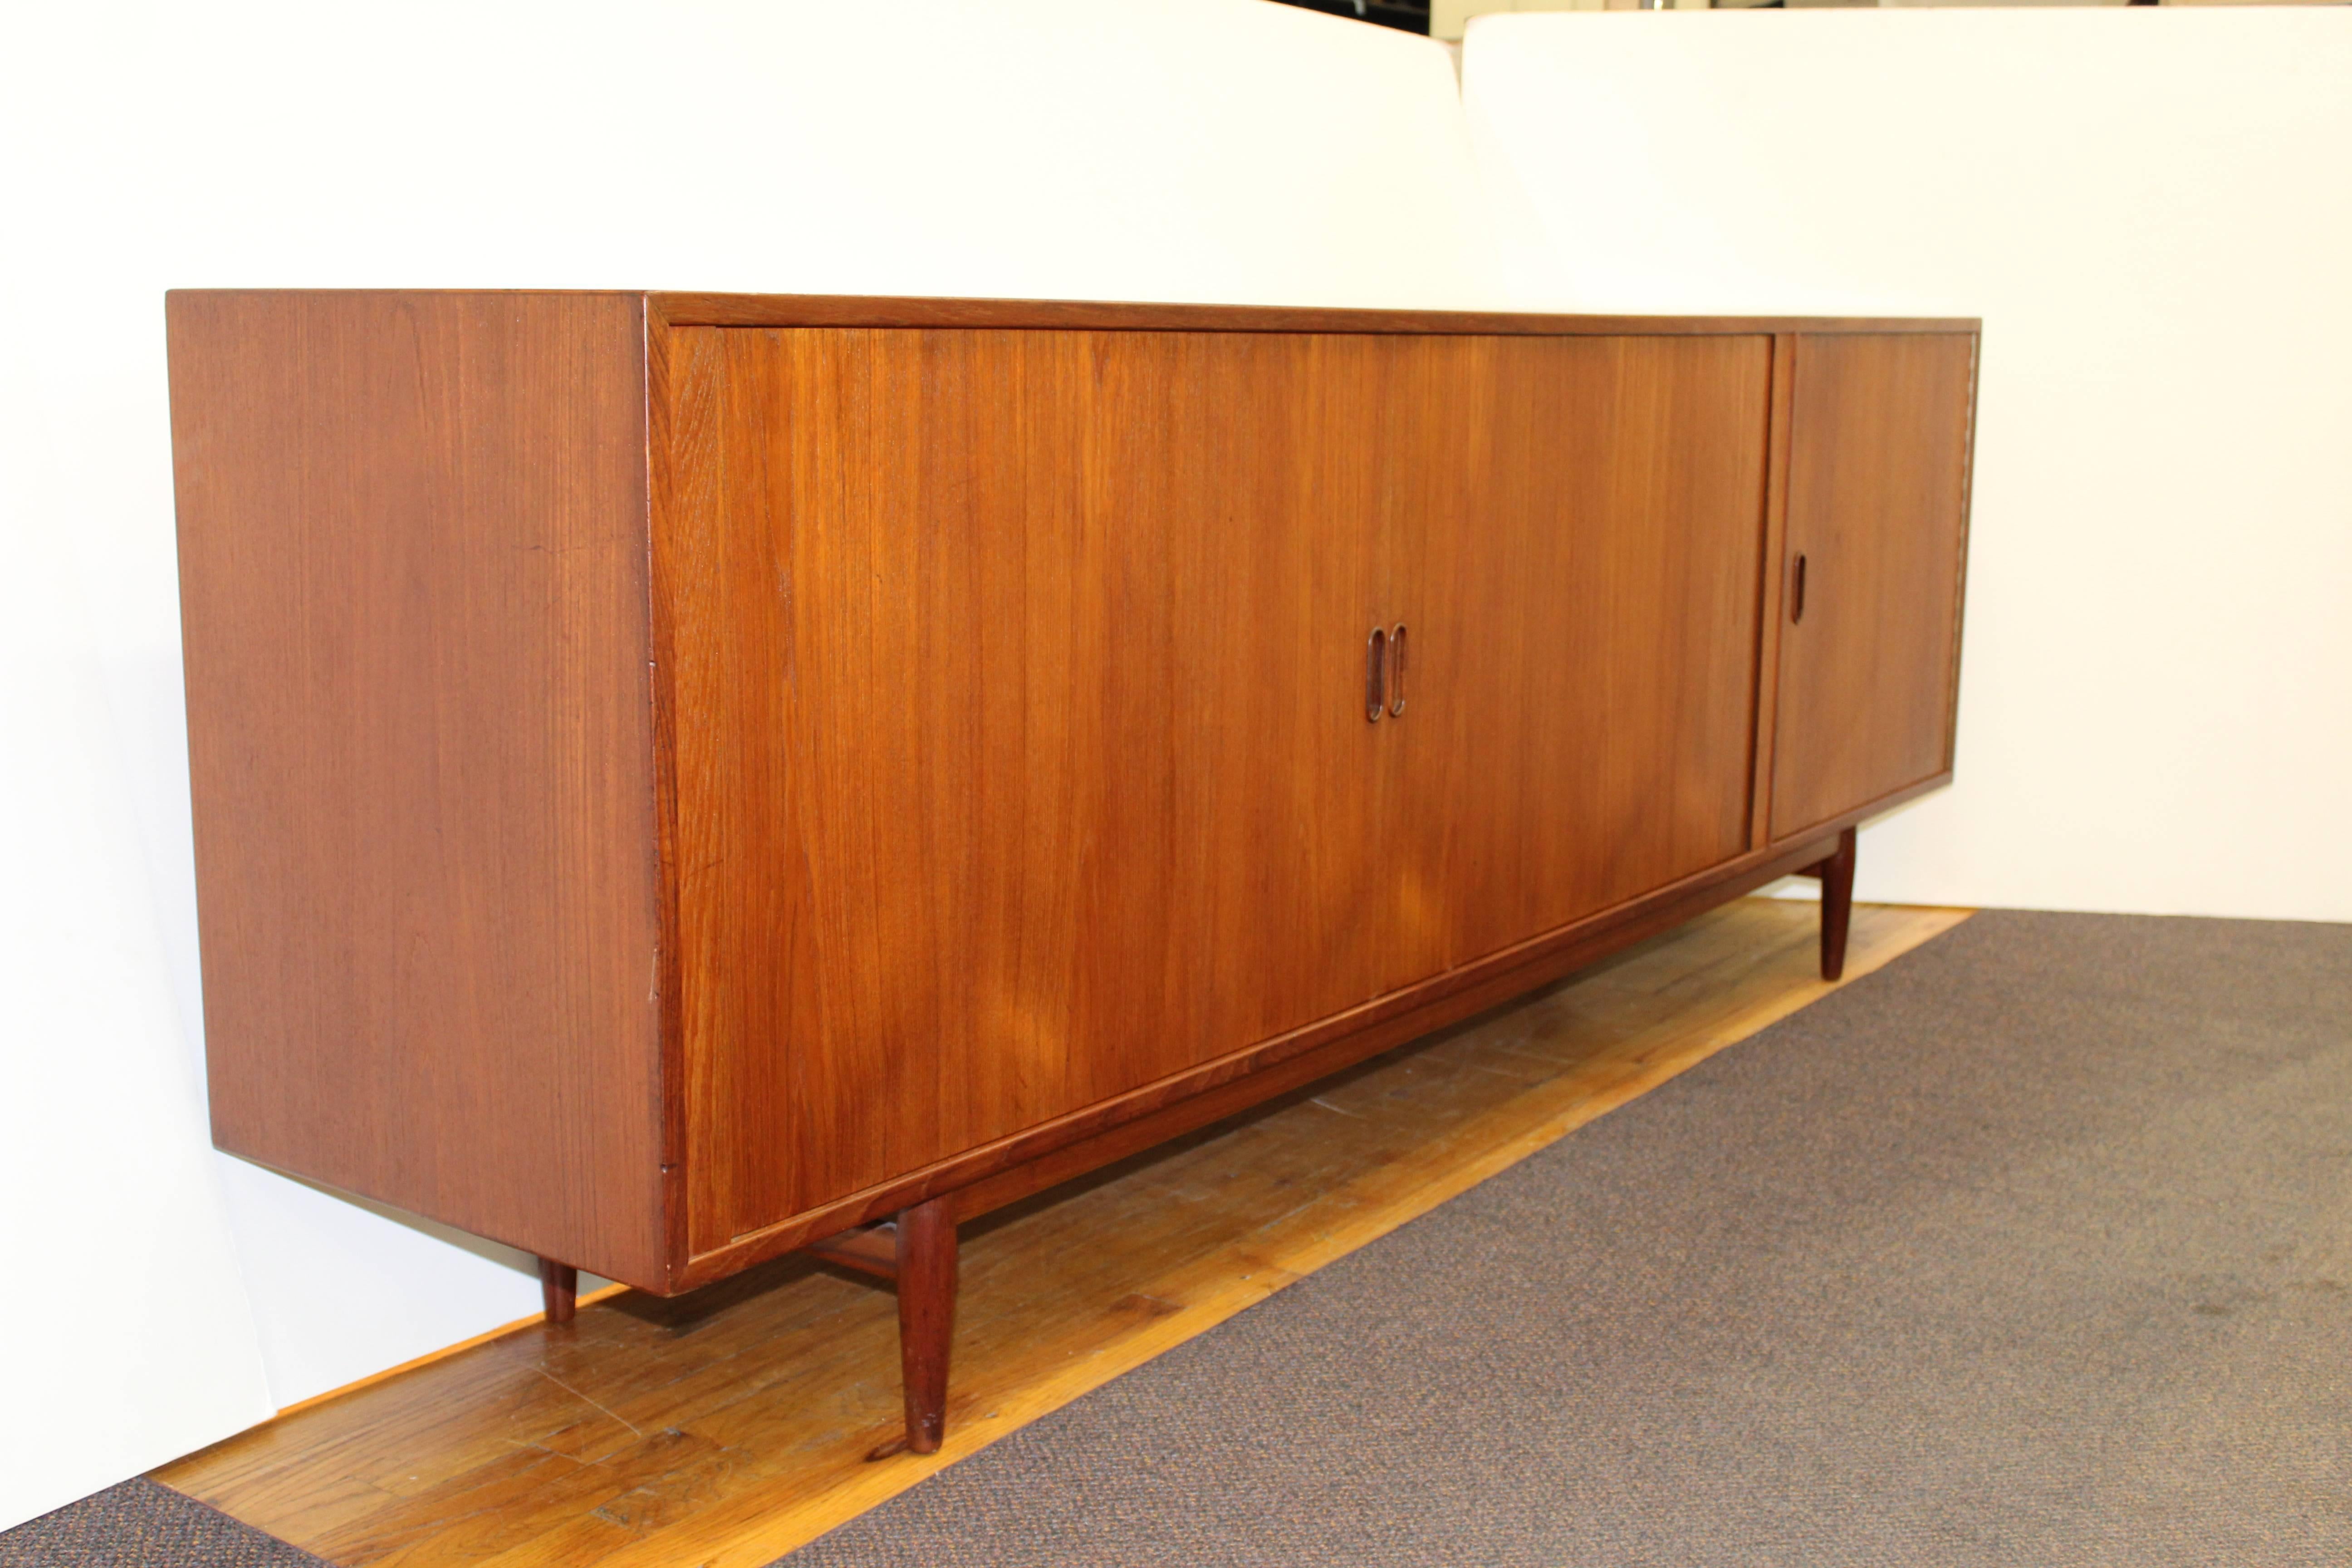 A Mid-Century credenza by Arne Vodder for Sibast in rich teak featuring two roll-front doors as well as a swing door on the right side of the middle panel. This credenza is in good vintage condition and has wear consistent with age and use.
 